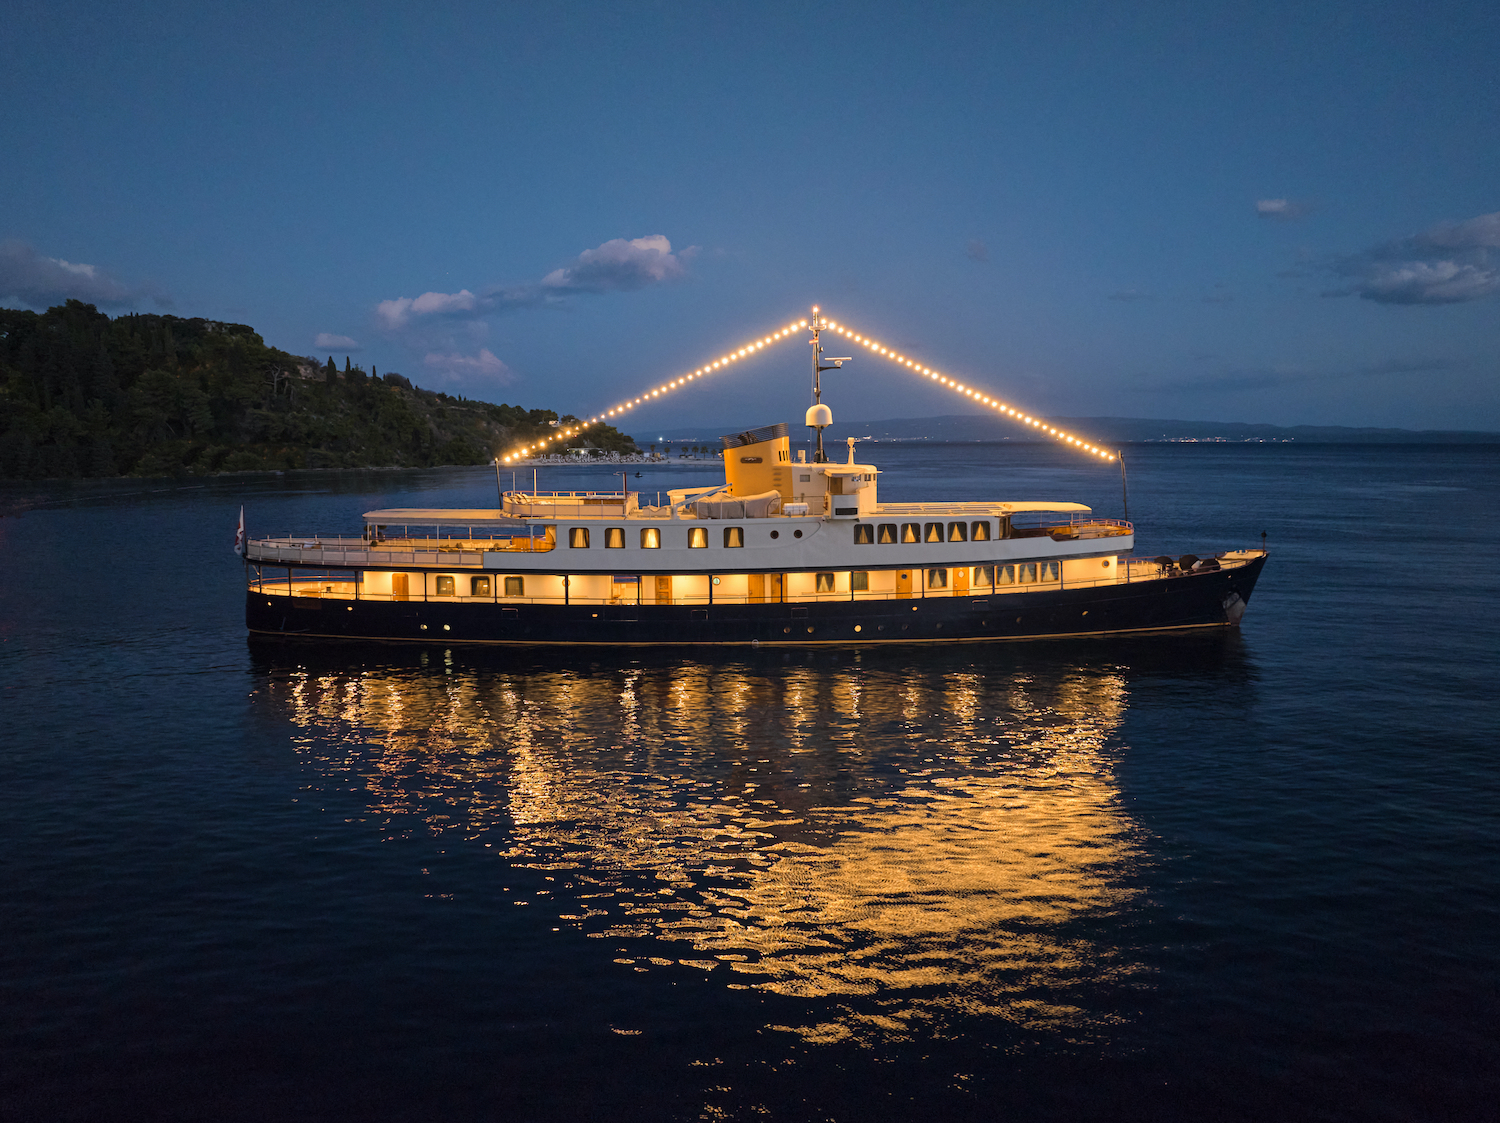 Profile Of The Yacht In The Evening With Lights